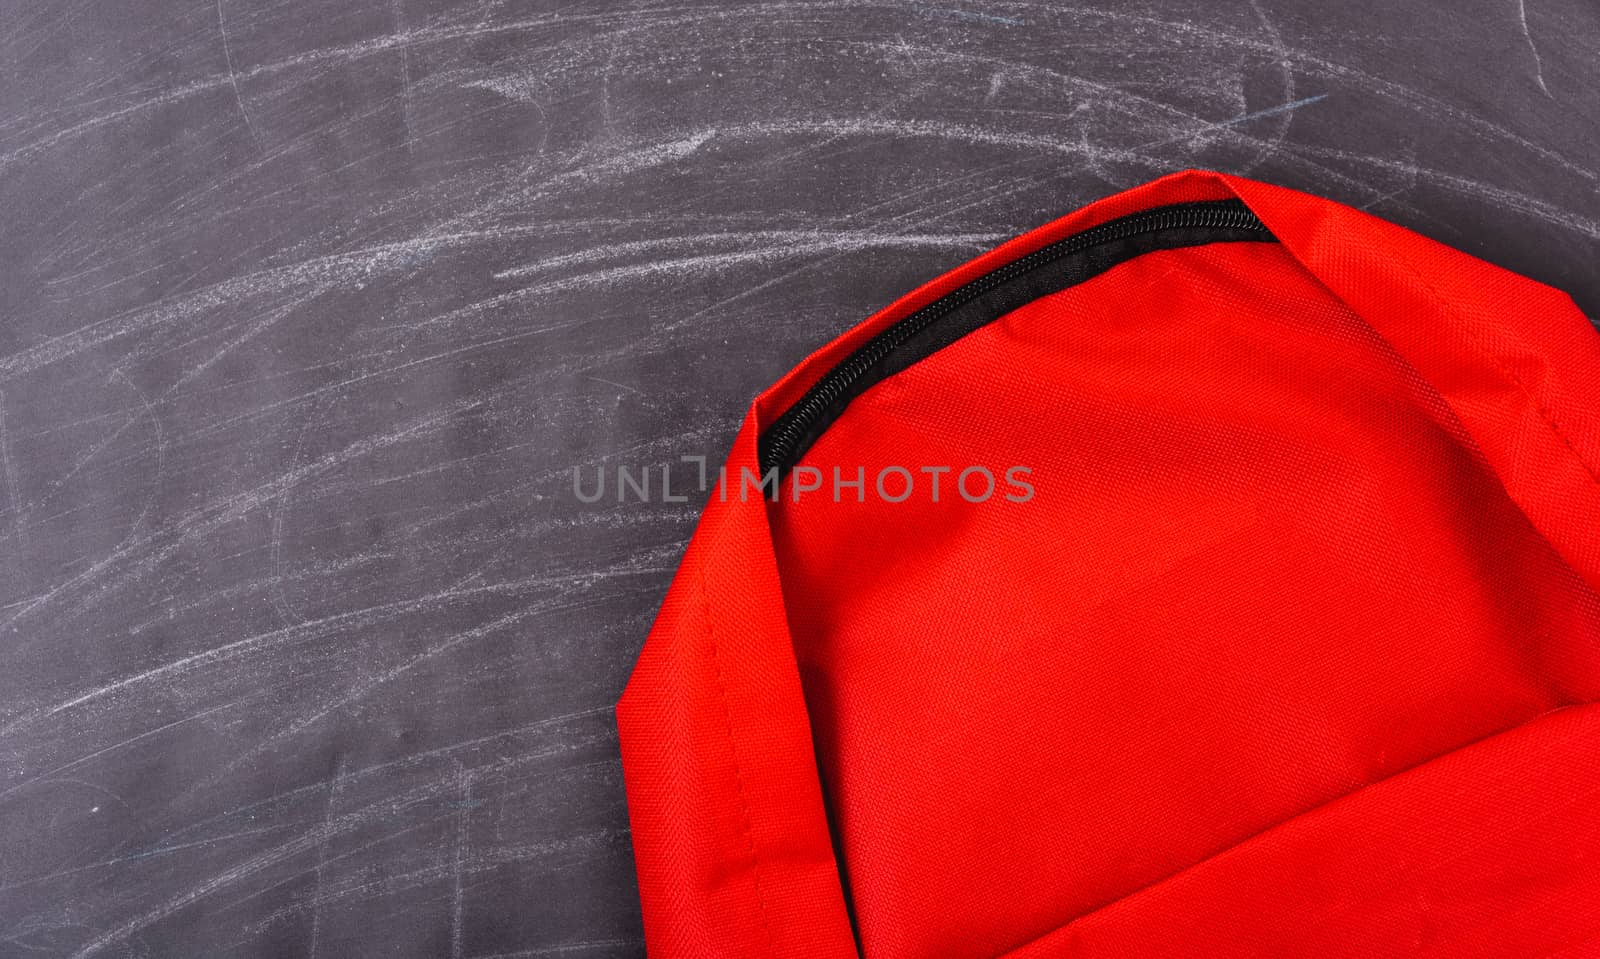 Back to school shopping pocket backpack on the education red bag by Sorapop